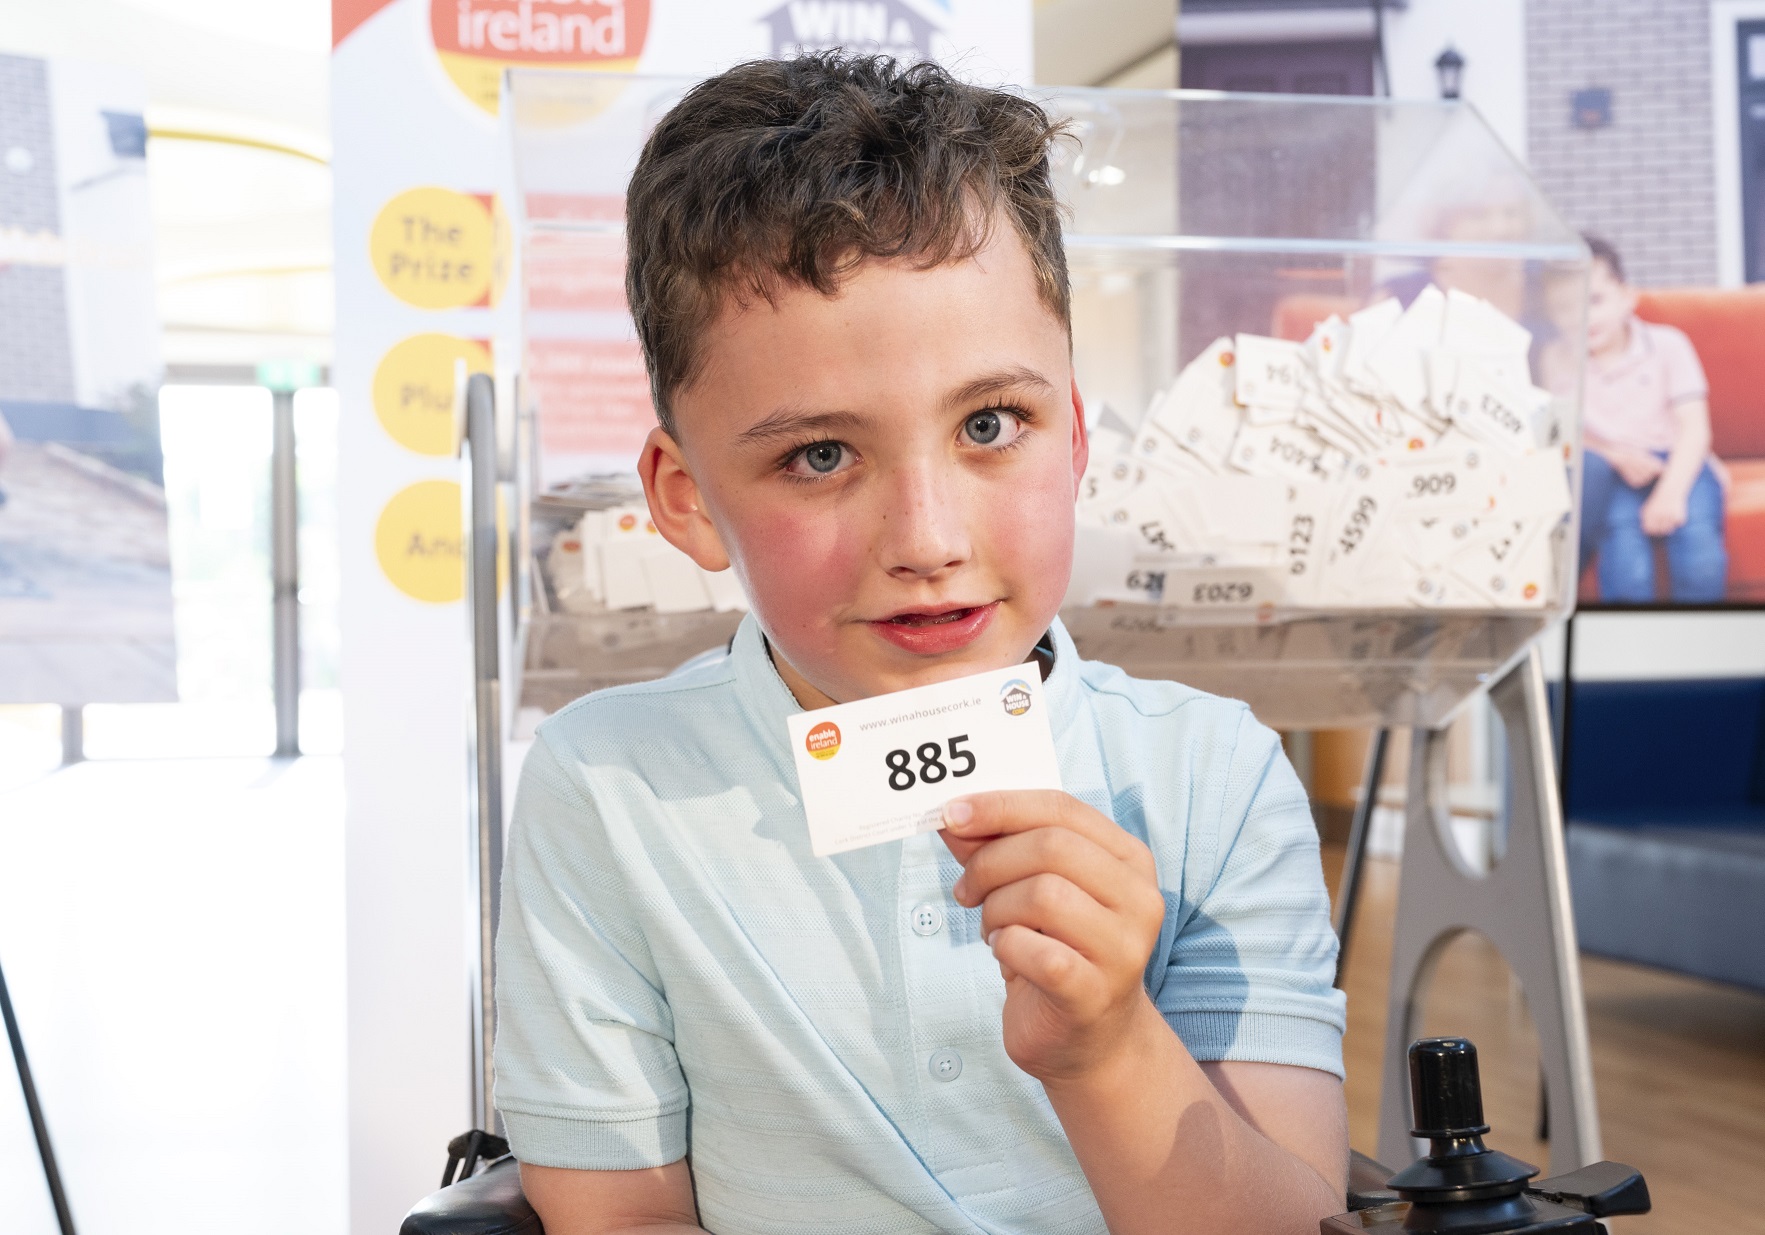 Boy holds up ticket no. 885